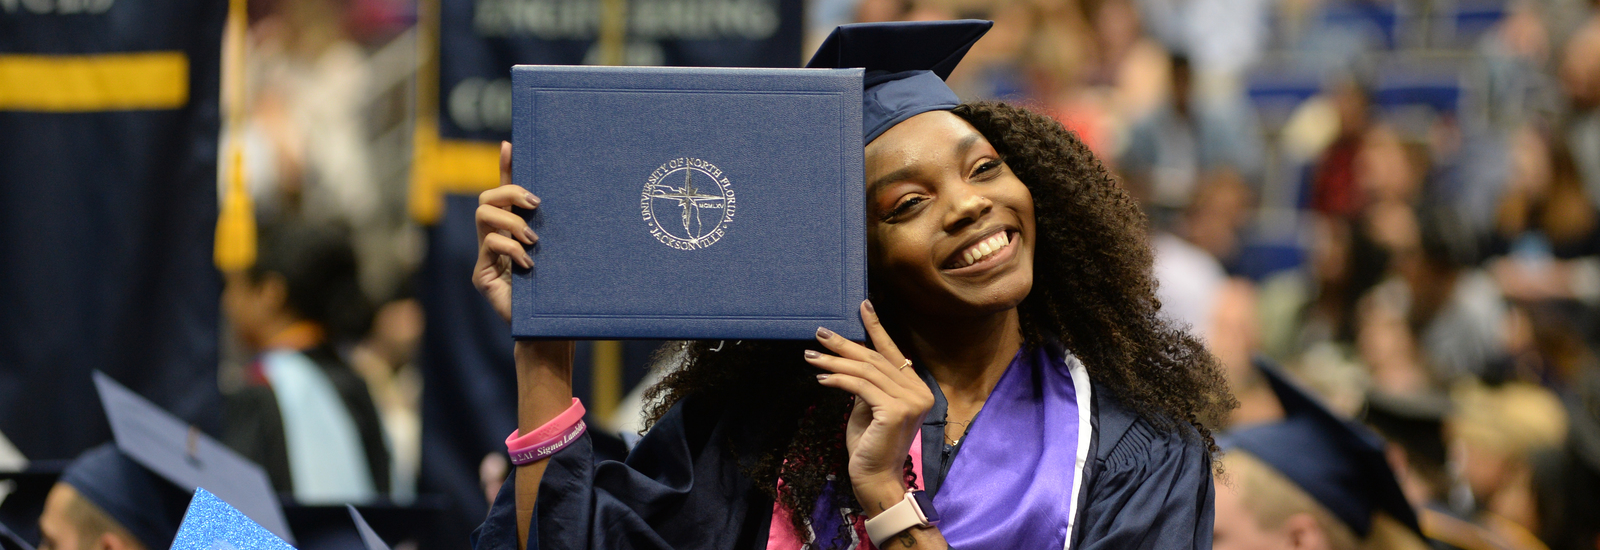 Female student graduating holding up a UNF diploma cover by her face and smiling